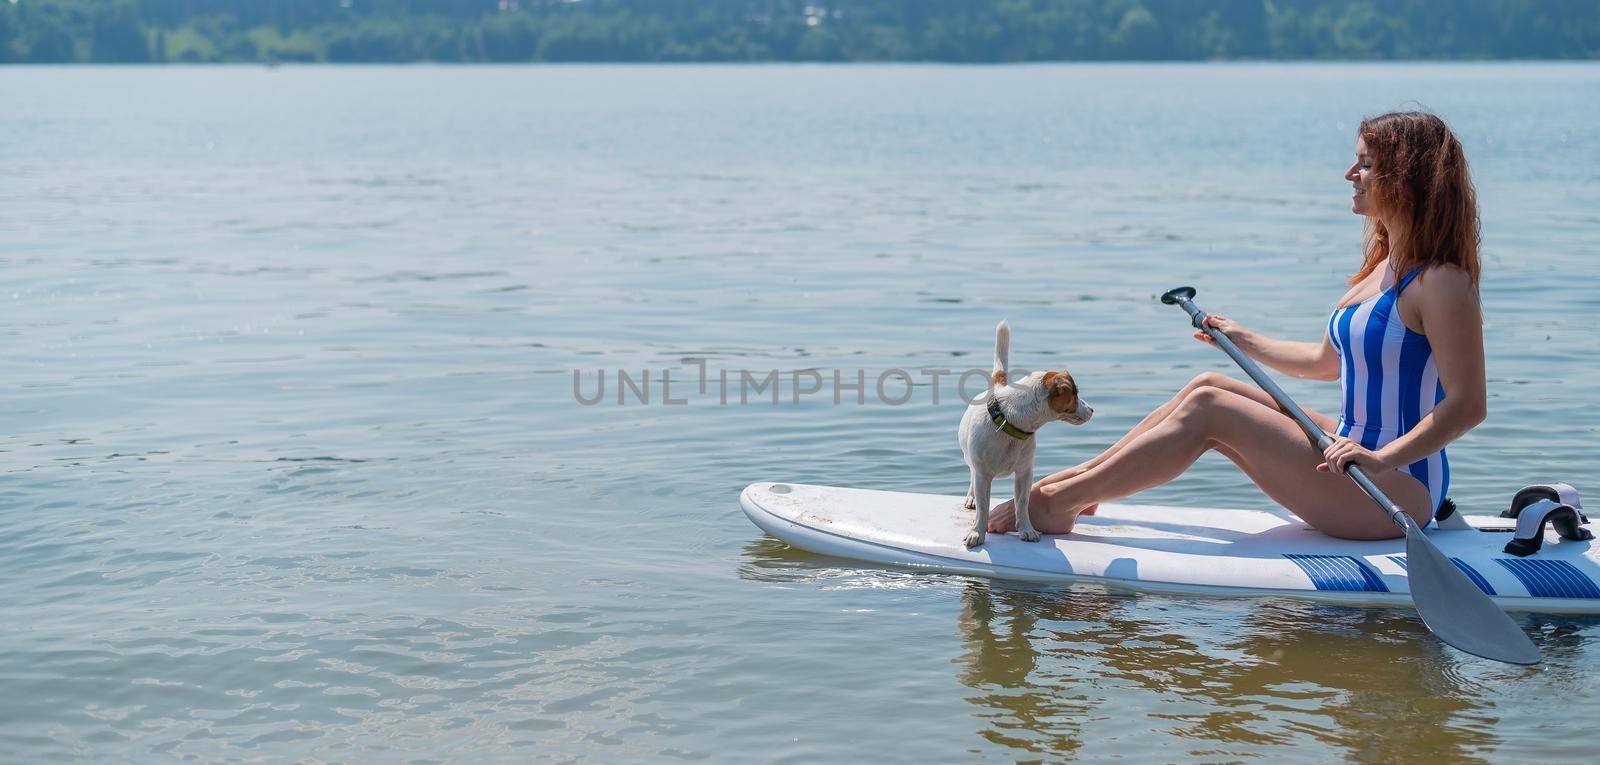 A woman is riding a sup surfboard with a dog on the lake by mrwed54